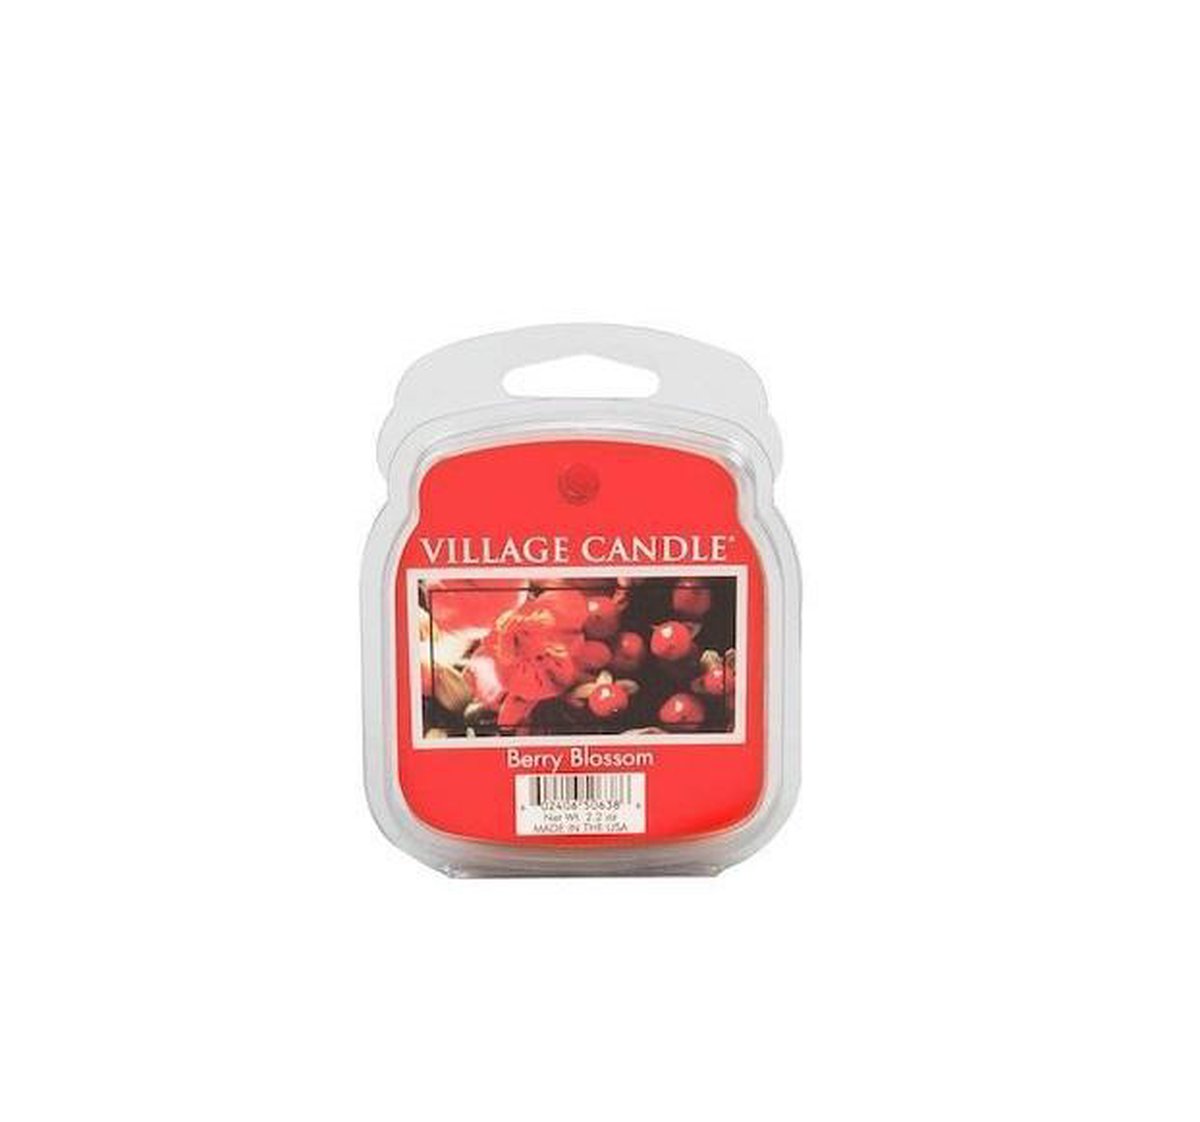 Village Candle - Berry Blossom - Wax Melt